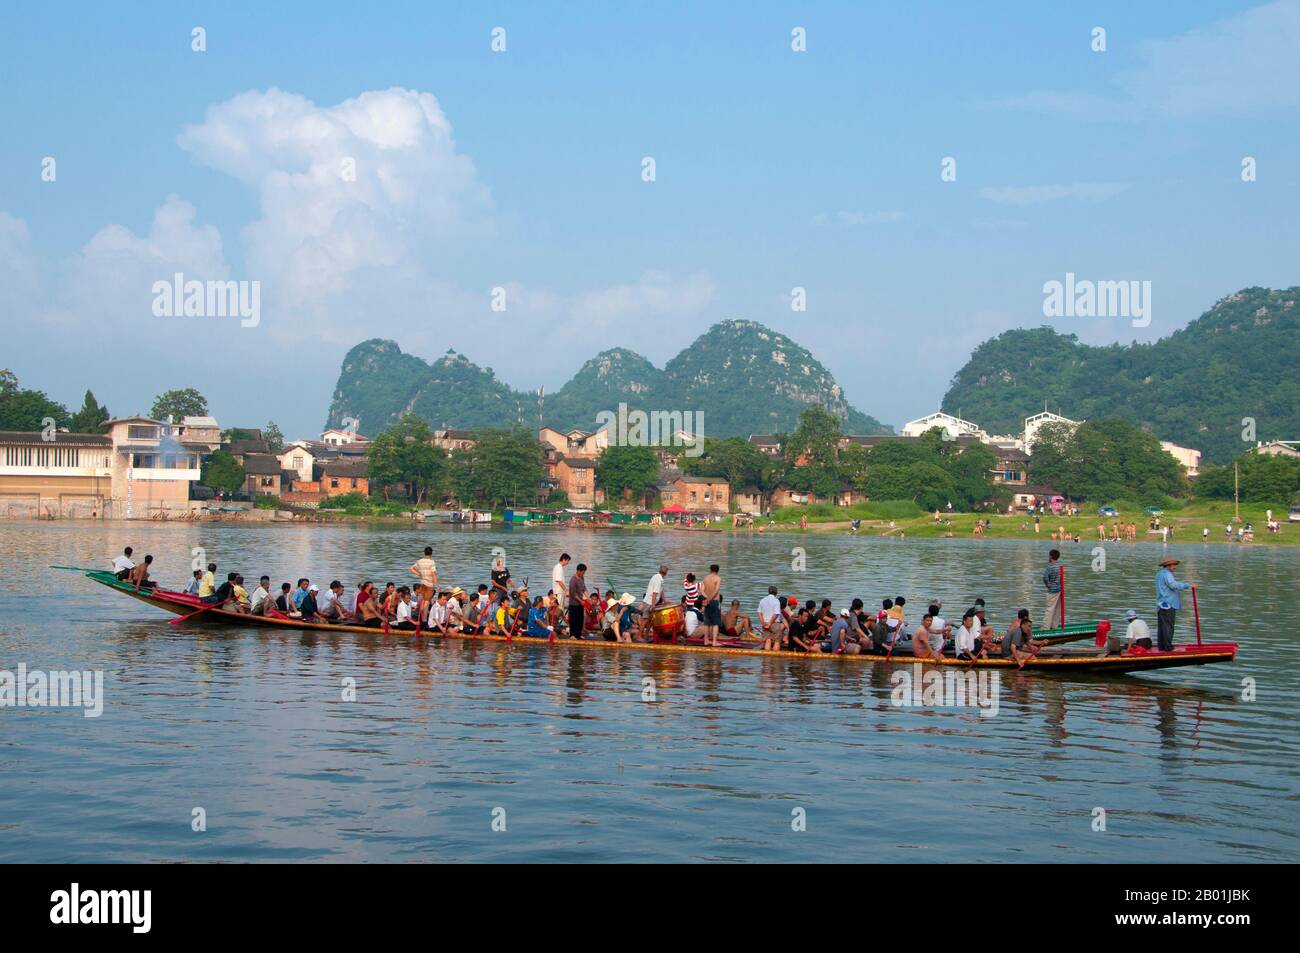 China: Dragon boats on the Li River with Seven Star Park in the background, Guilin, Guangxi Province.  Guilin's Dragon Boat Festival is held on the fifth day of the fifth month (May) of the Chinese lunar calendar every 3 years. The festival was originally held in memory of the great Chinese poet, Quyuan.  The name Guilin means ‘Cassia Woods’ and is named after the osmanthus (cassia) blossoms that bloom throughout the autumn period.  Guilin is the scene of China’s most famous landscapes, inspiring thousands of paintings over many centuries. Stock Photo